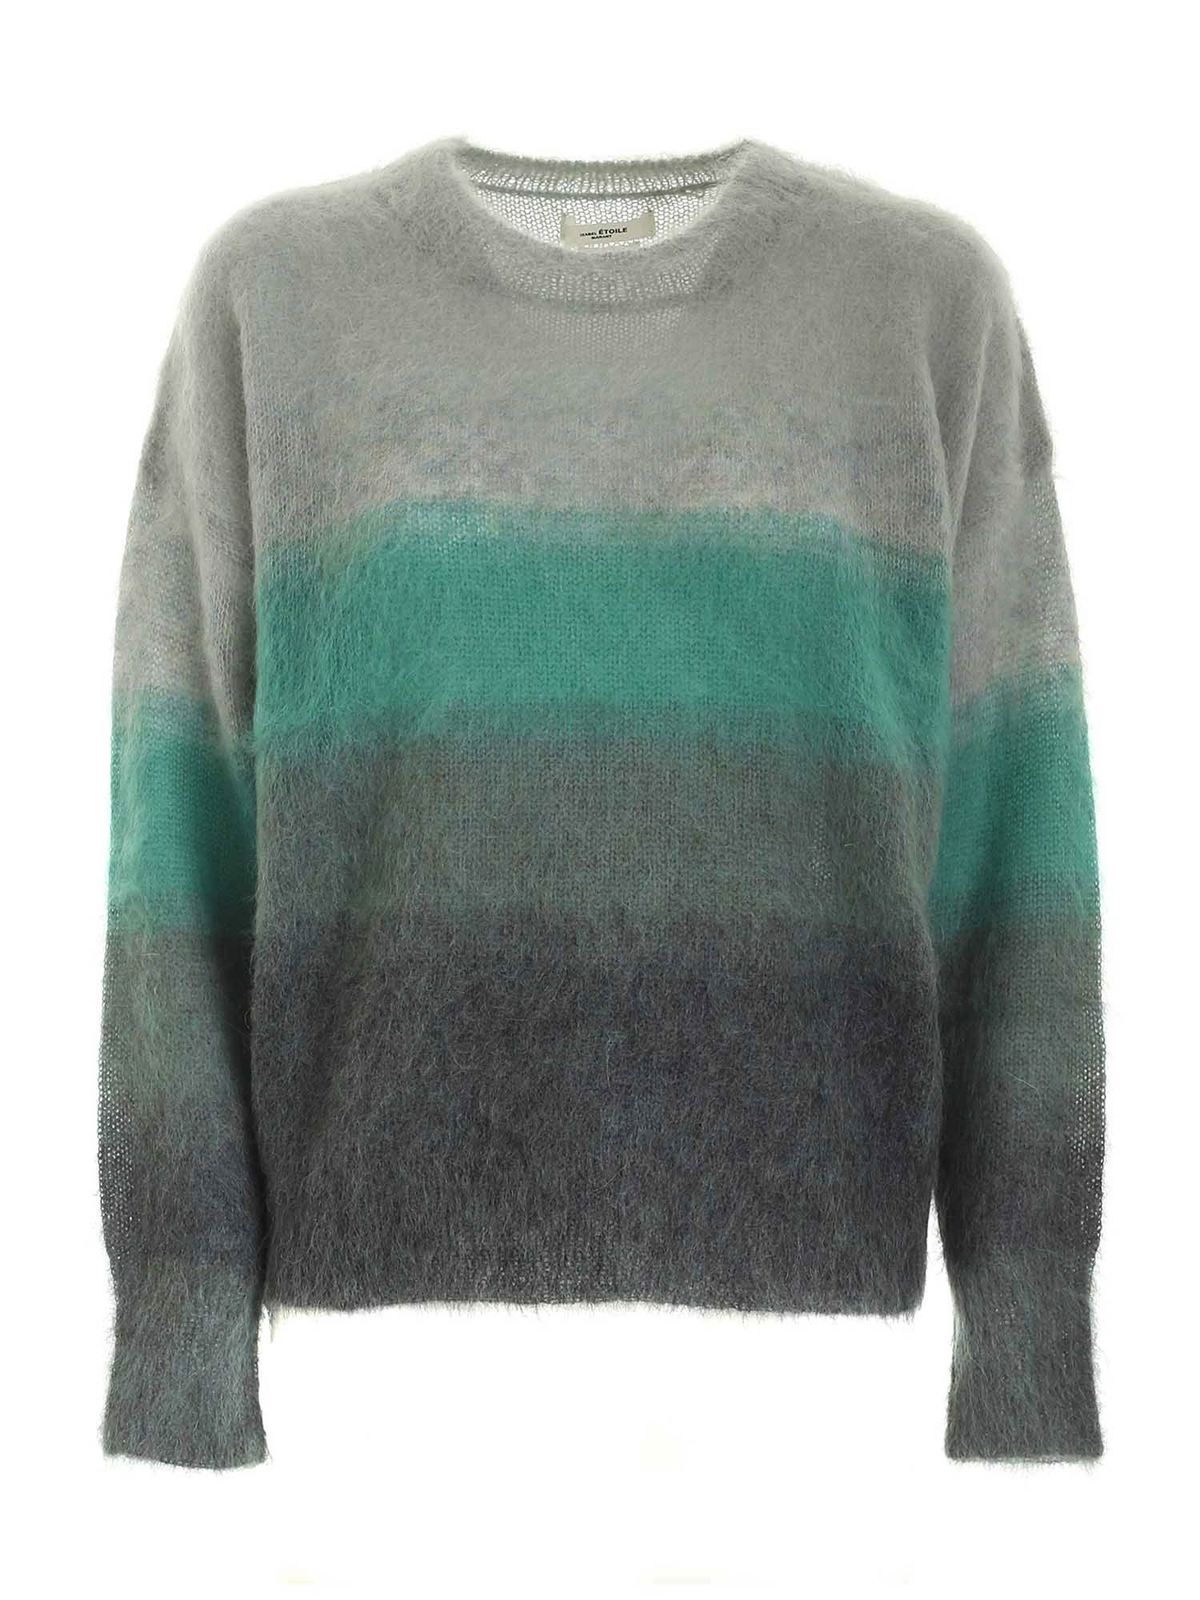 Crew necks isabel marant etoile - Drussell pullover in shades of green ...